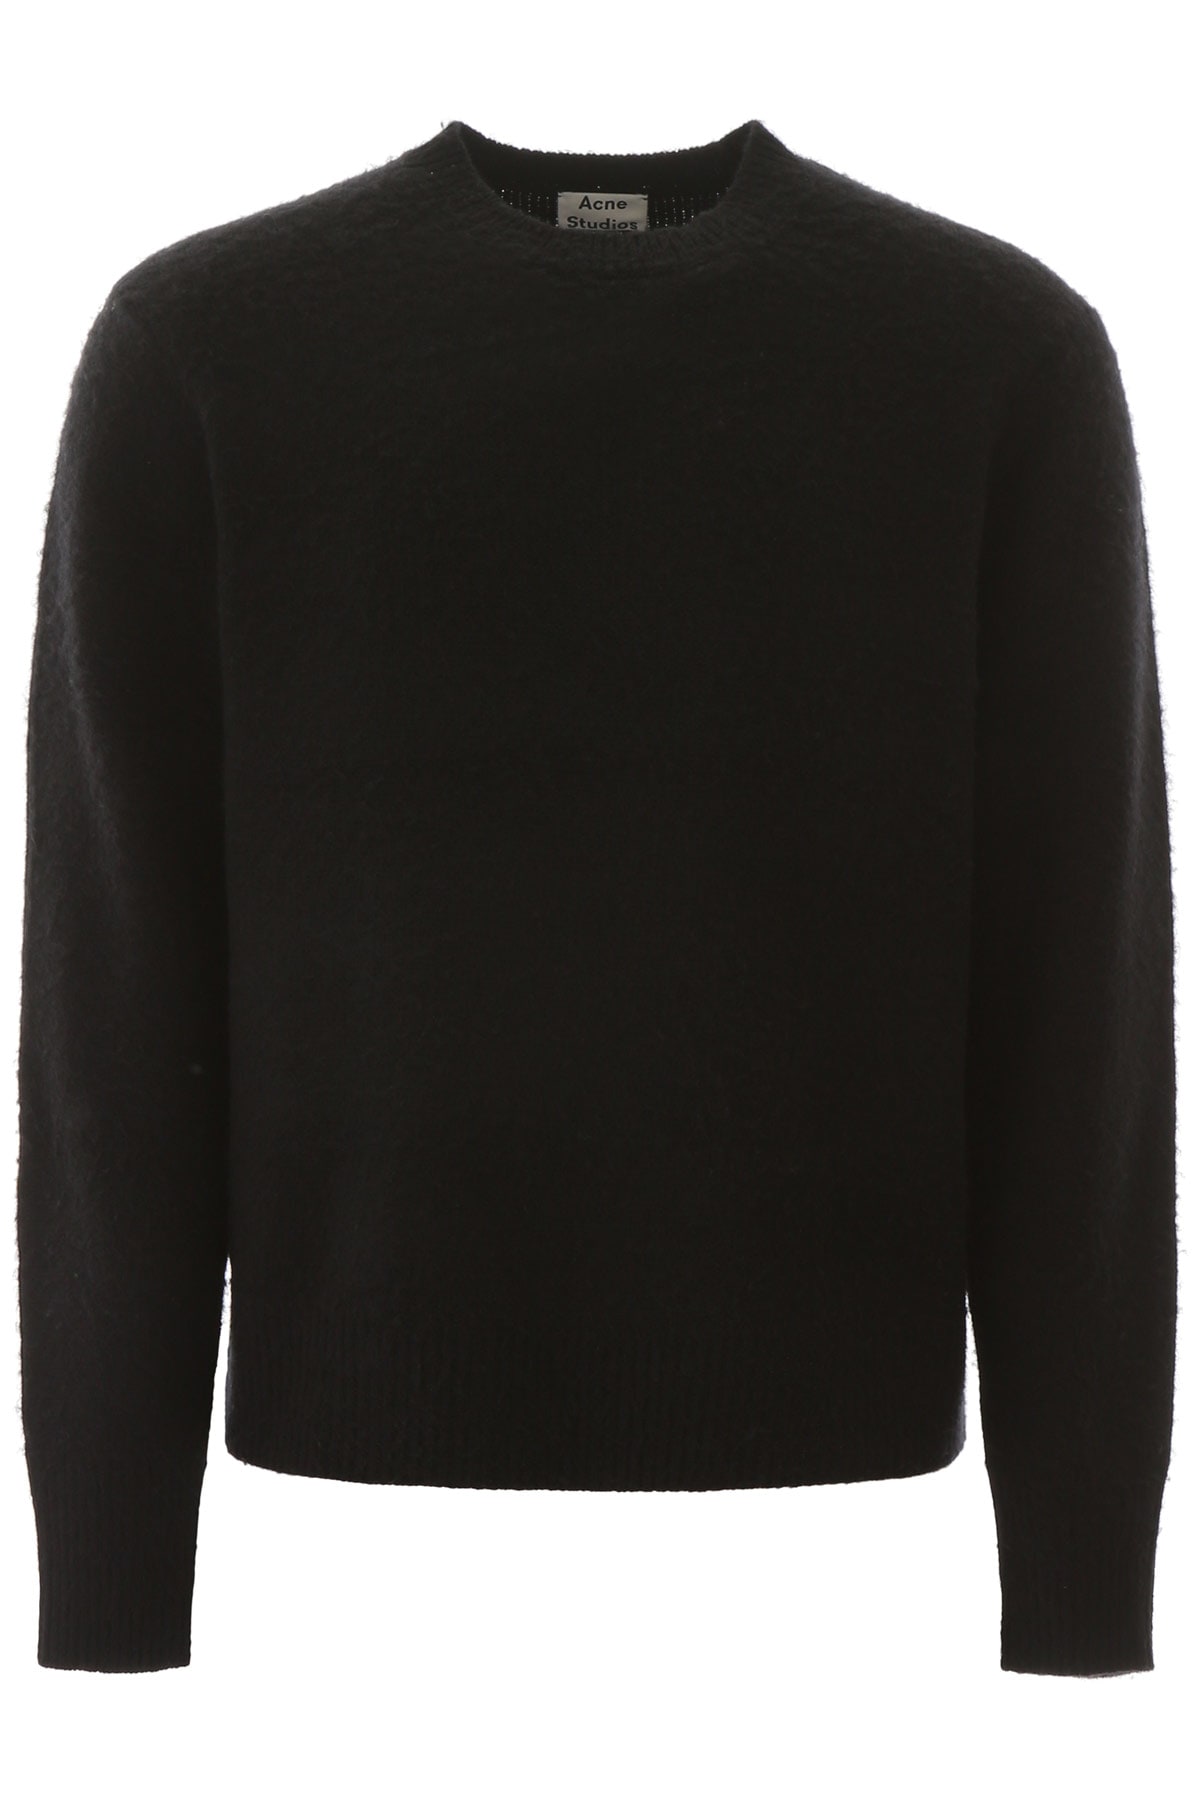 ACNE STUDIOS WOOL AND CASHMERE SWEATER,11296524